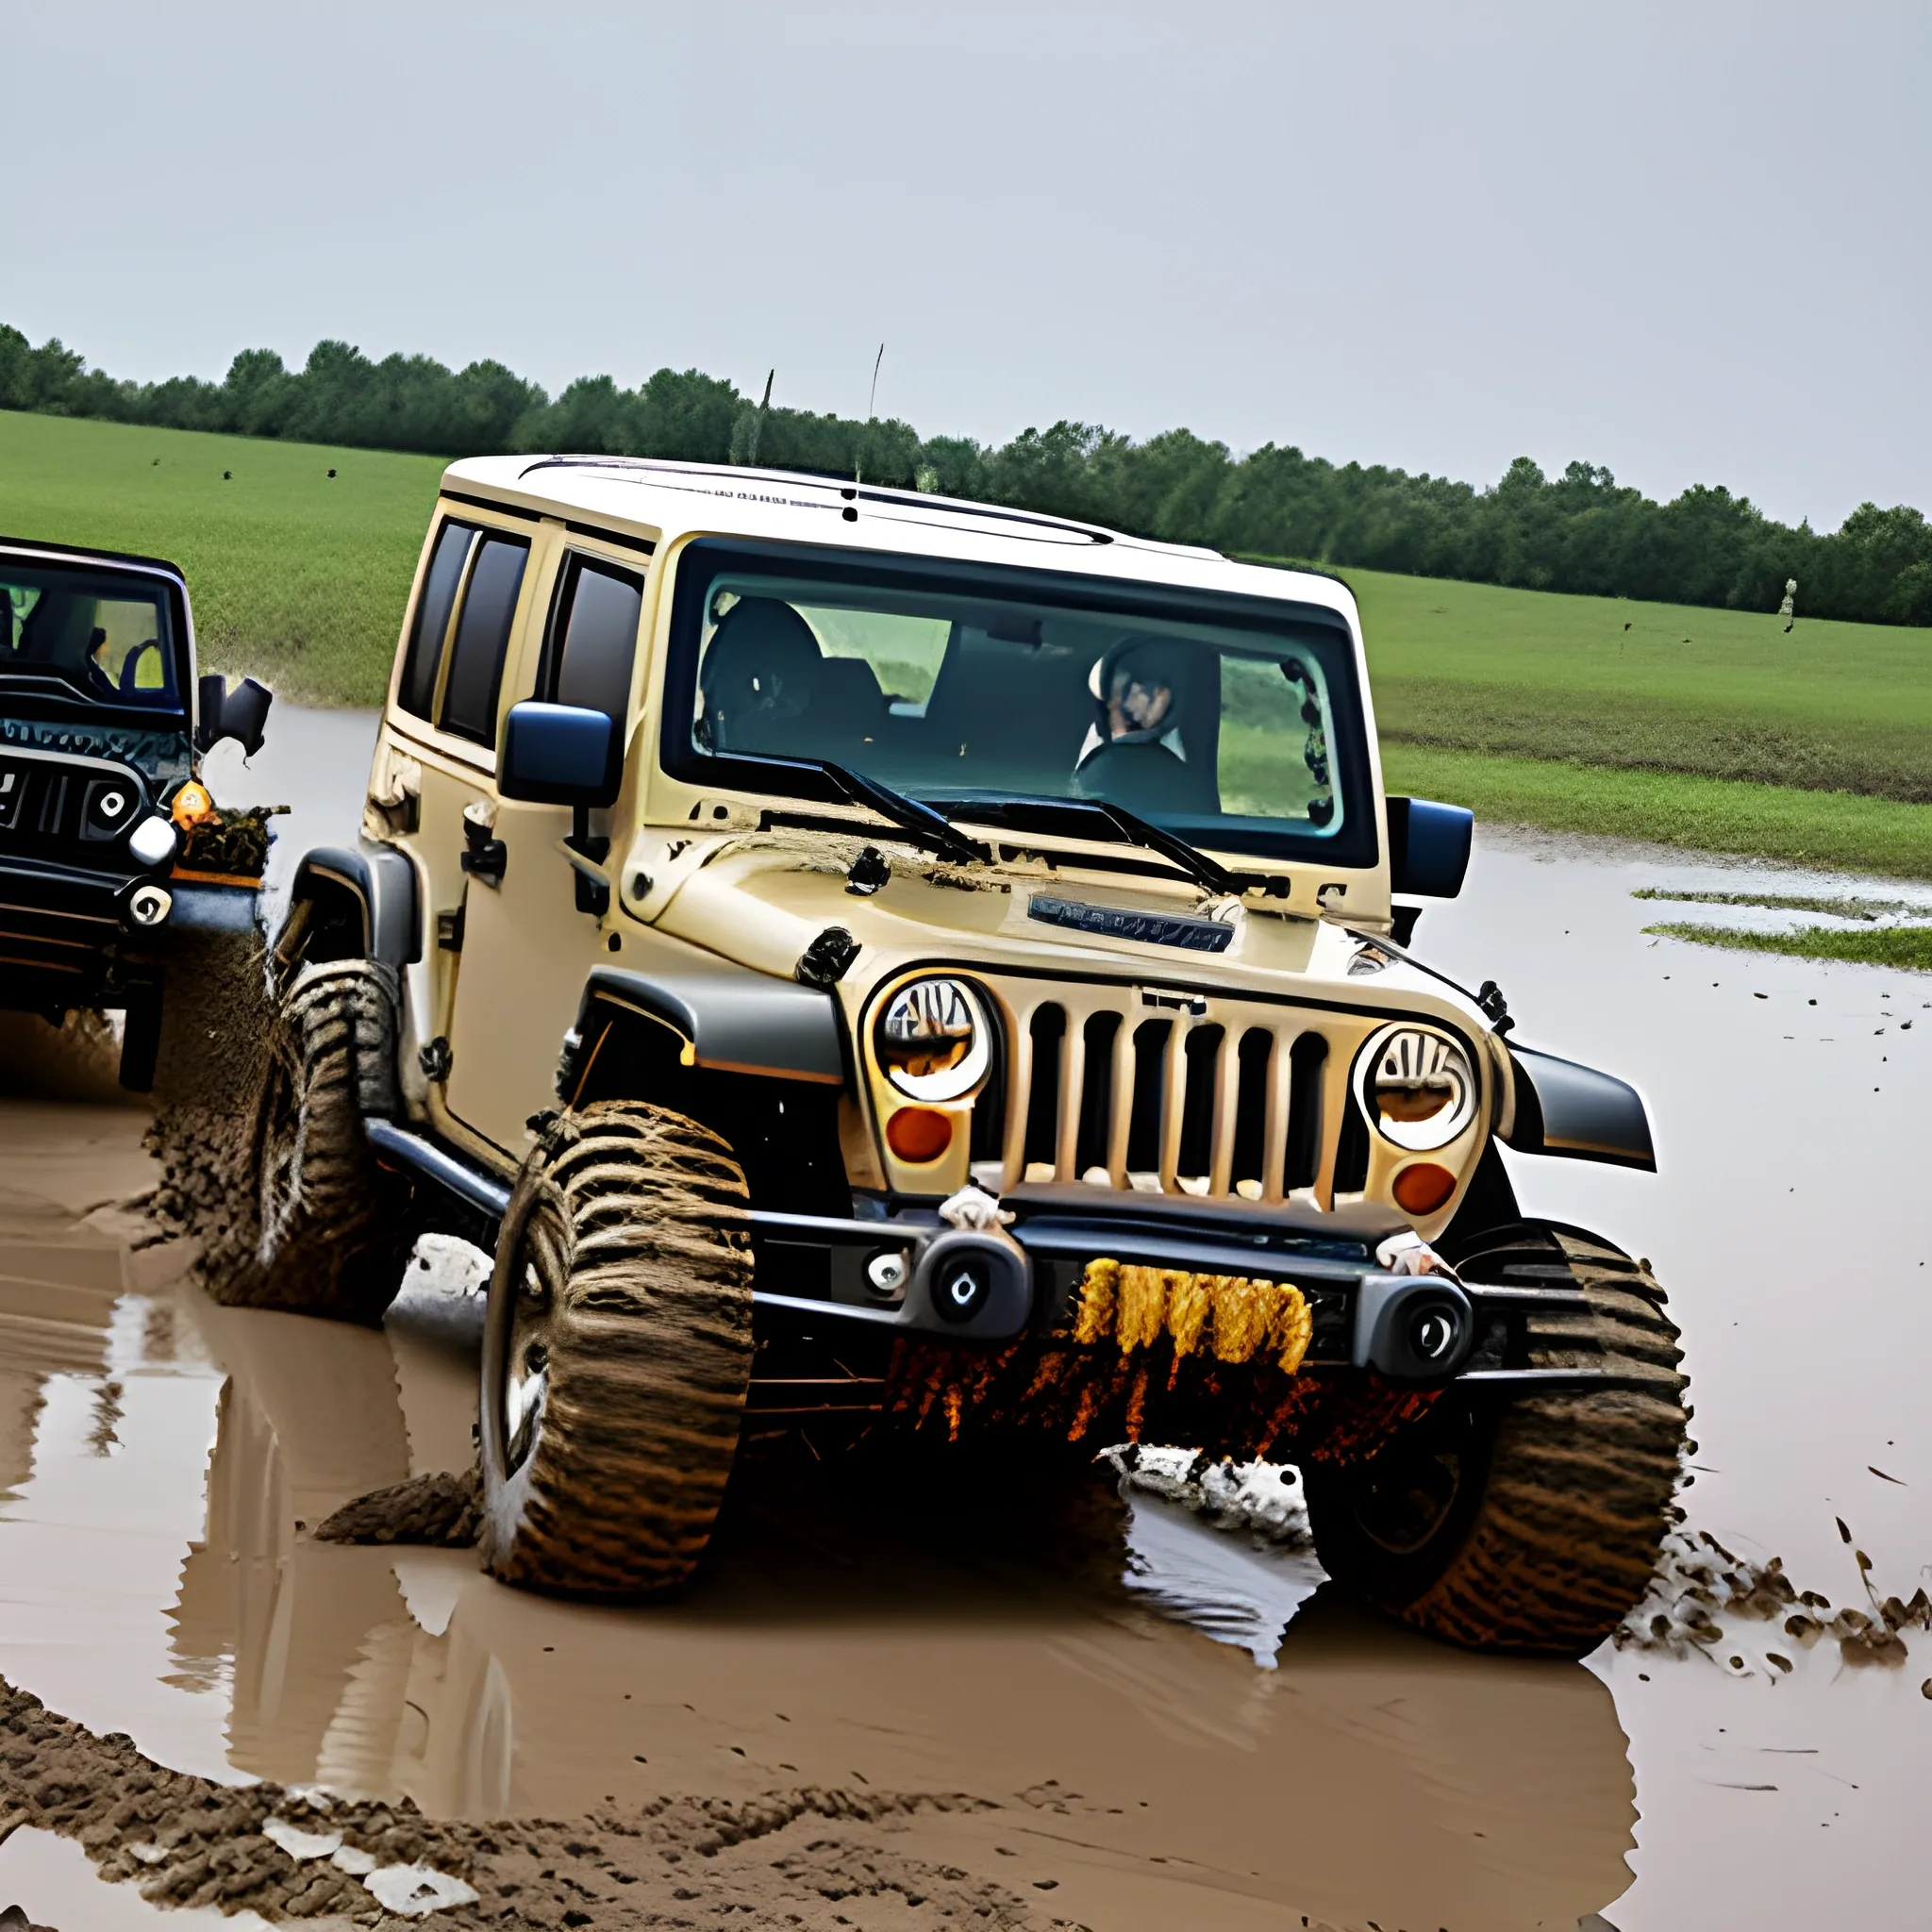  2 jeeps 
 in mud racing 
